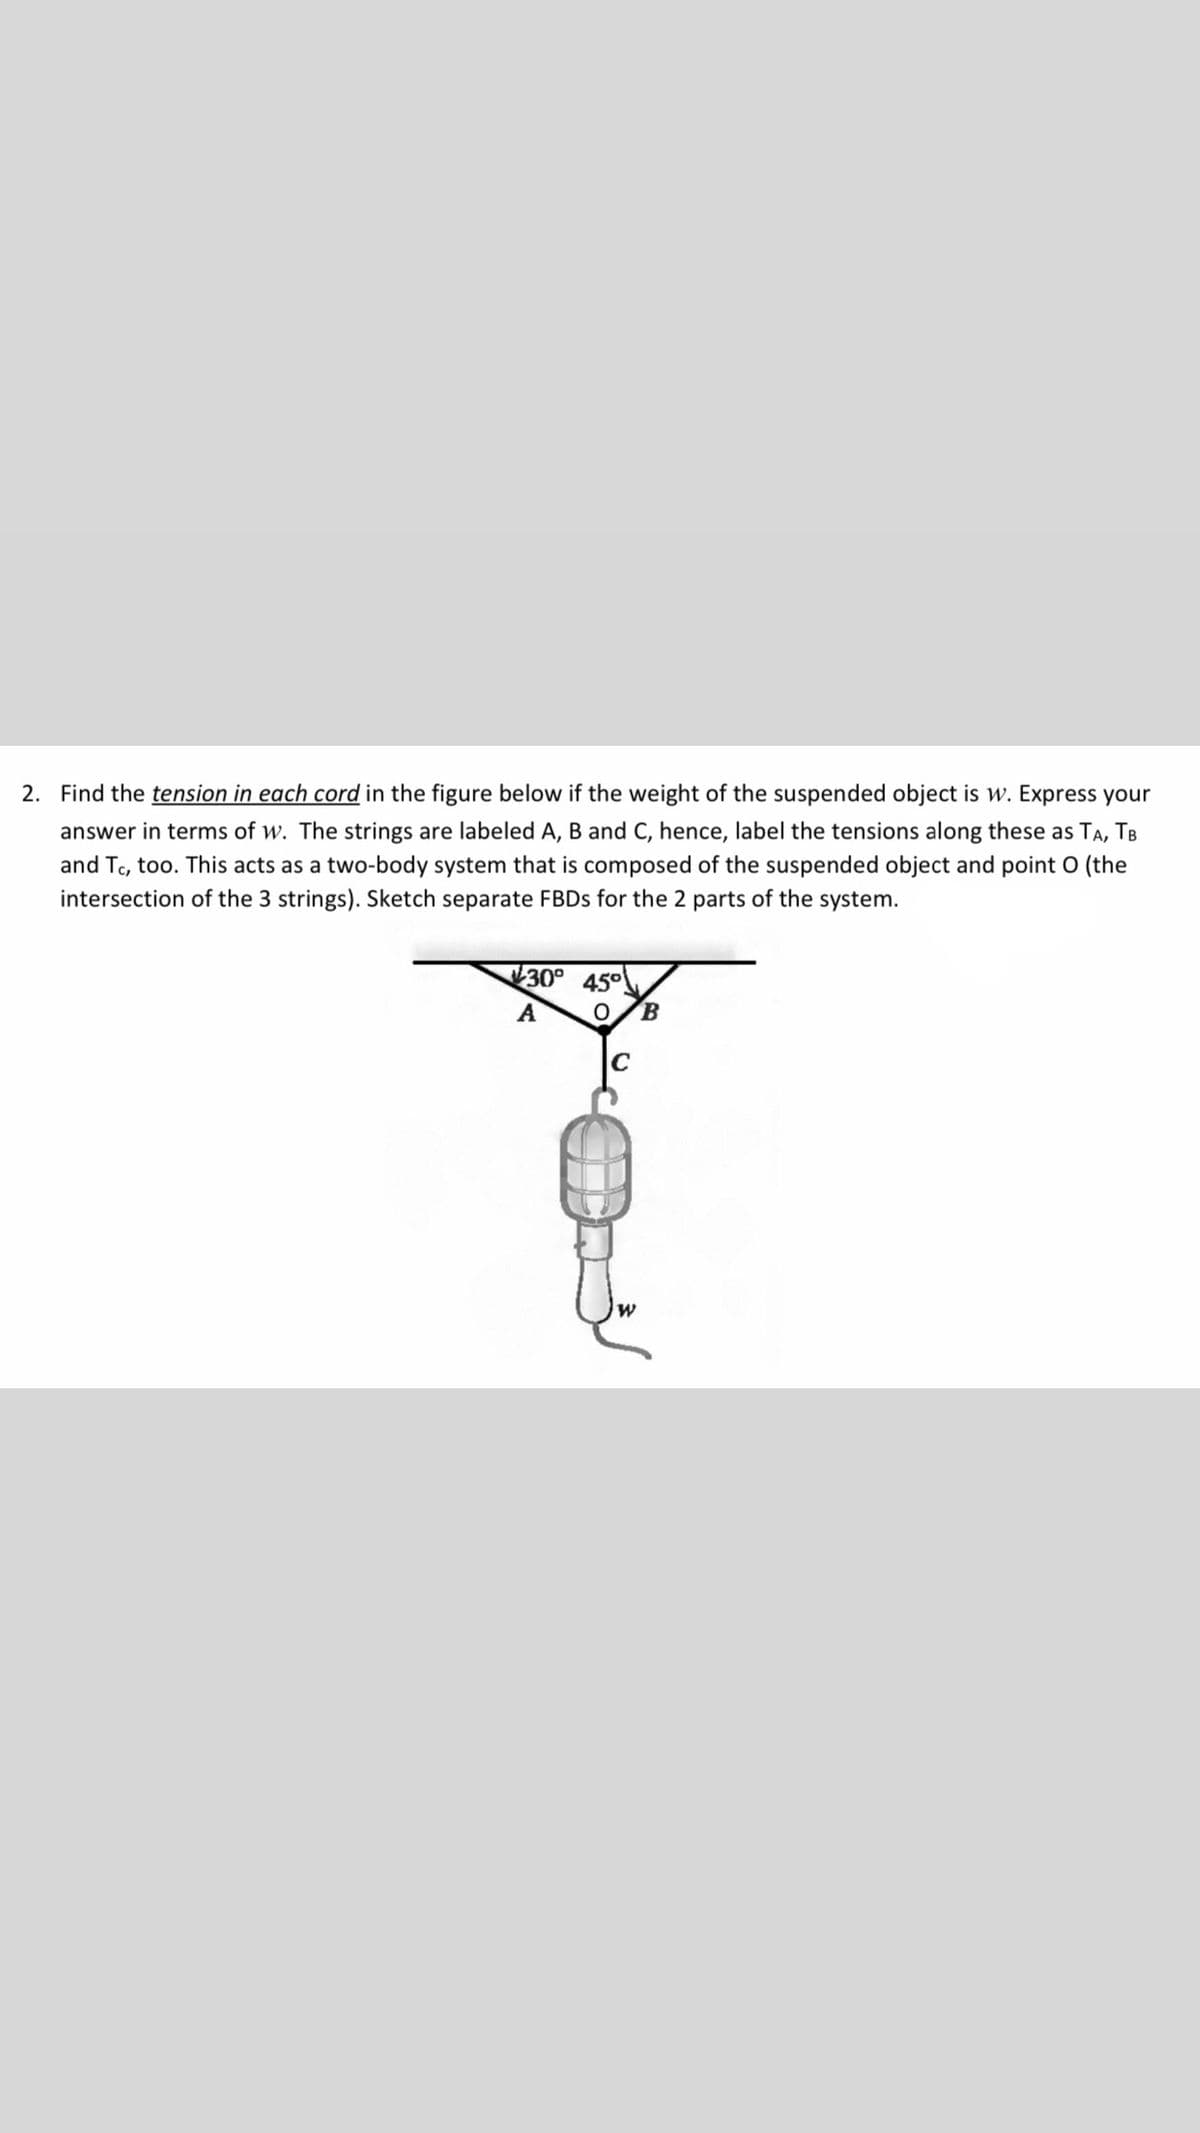 2. Find the tension in each cord in the figure below if the weight of the suspended object is w. Express your
answer in terms of w. The strings are labeled A, B and C, hence, label the tensions along these as TA, TB
and Tc, too. This acts as a two-body system that is composed of the suspended object and point O (the
intersection of the 3 strings). Sketch separate FBDS for the 2 parts of the system.
30°
45°
B.
A
C
